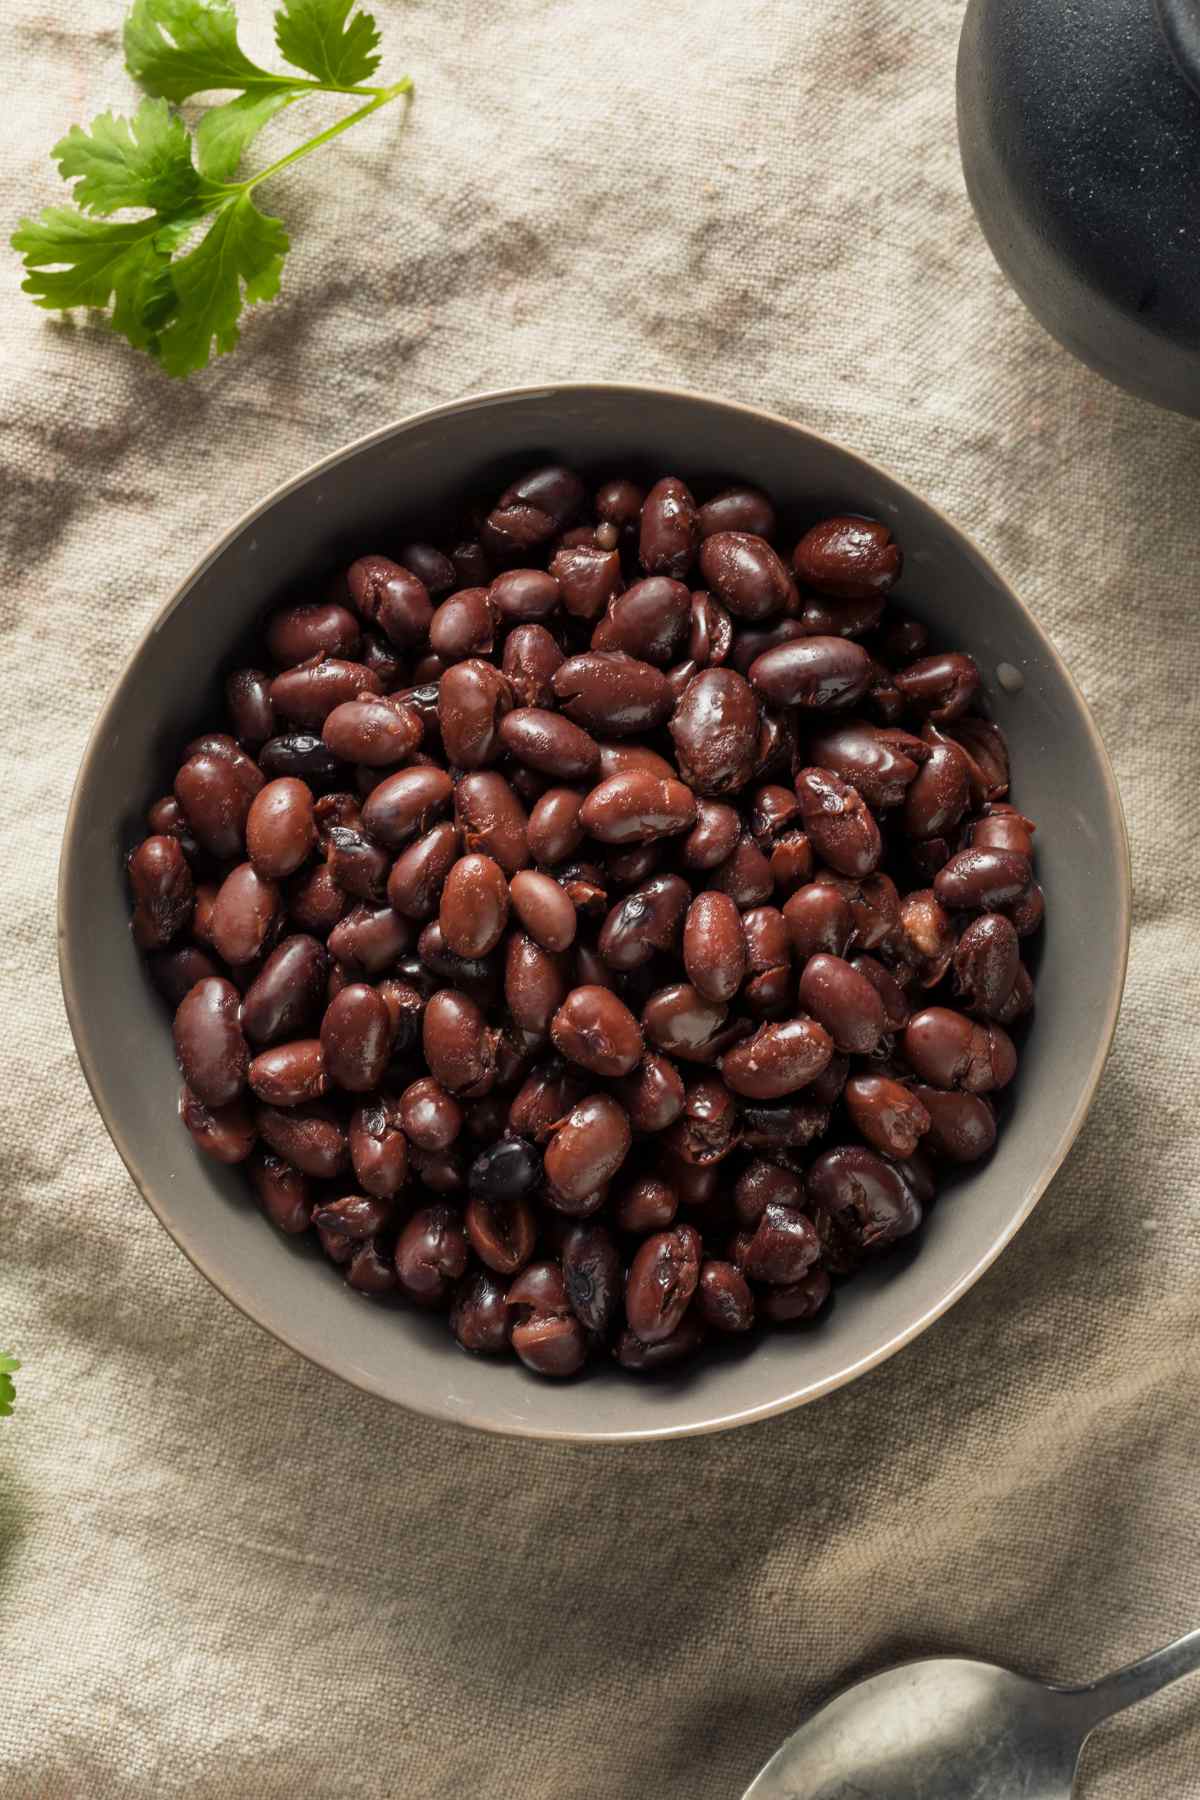 Are black beans keto? How many net carbs are in black beans? Read more to find out if this healthy and delicious bean is also keto-friendly.